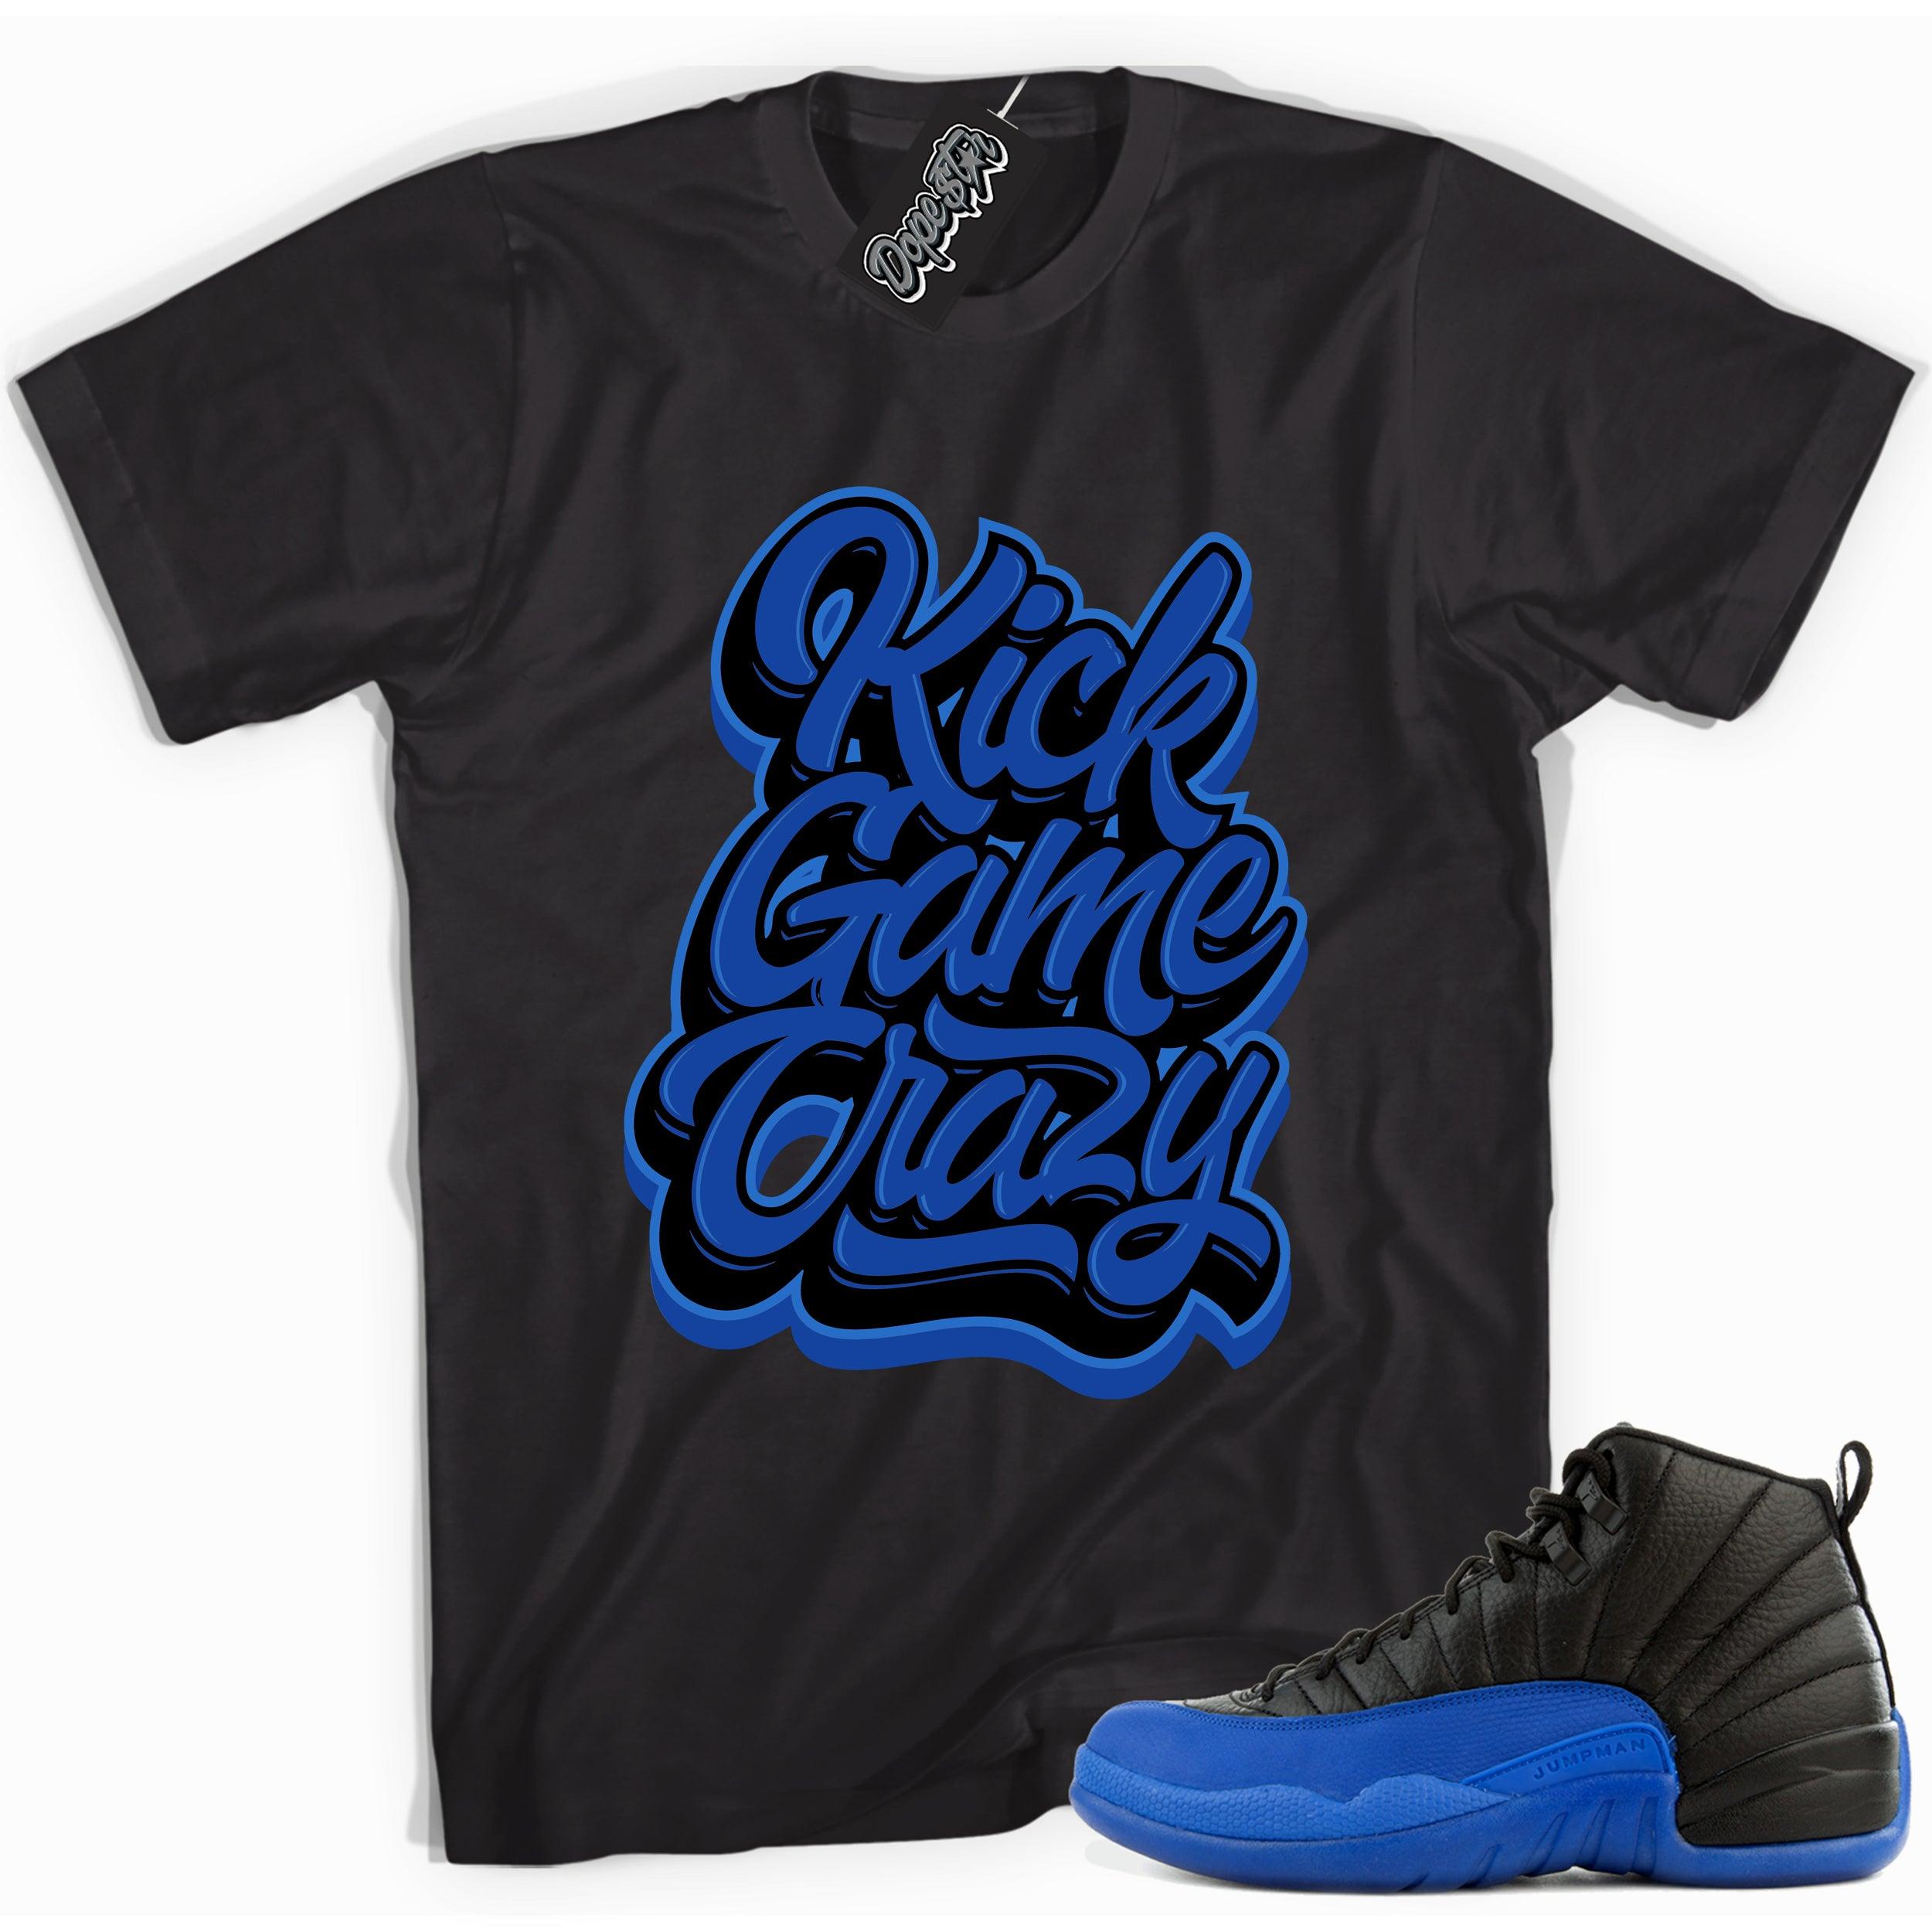 Cool black graphic tee with 'kick game crazy' print, that perfectly matches  Air Jordan 12 Retro Black Game Royal sneakers.